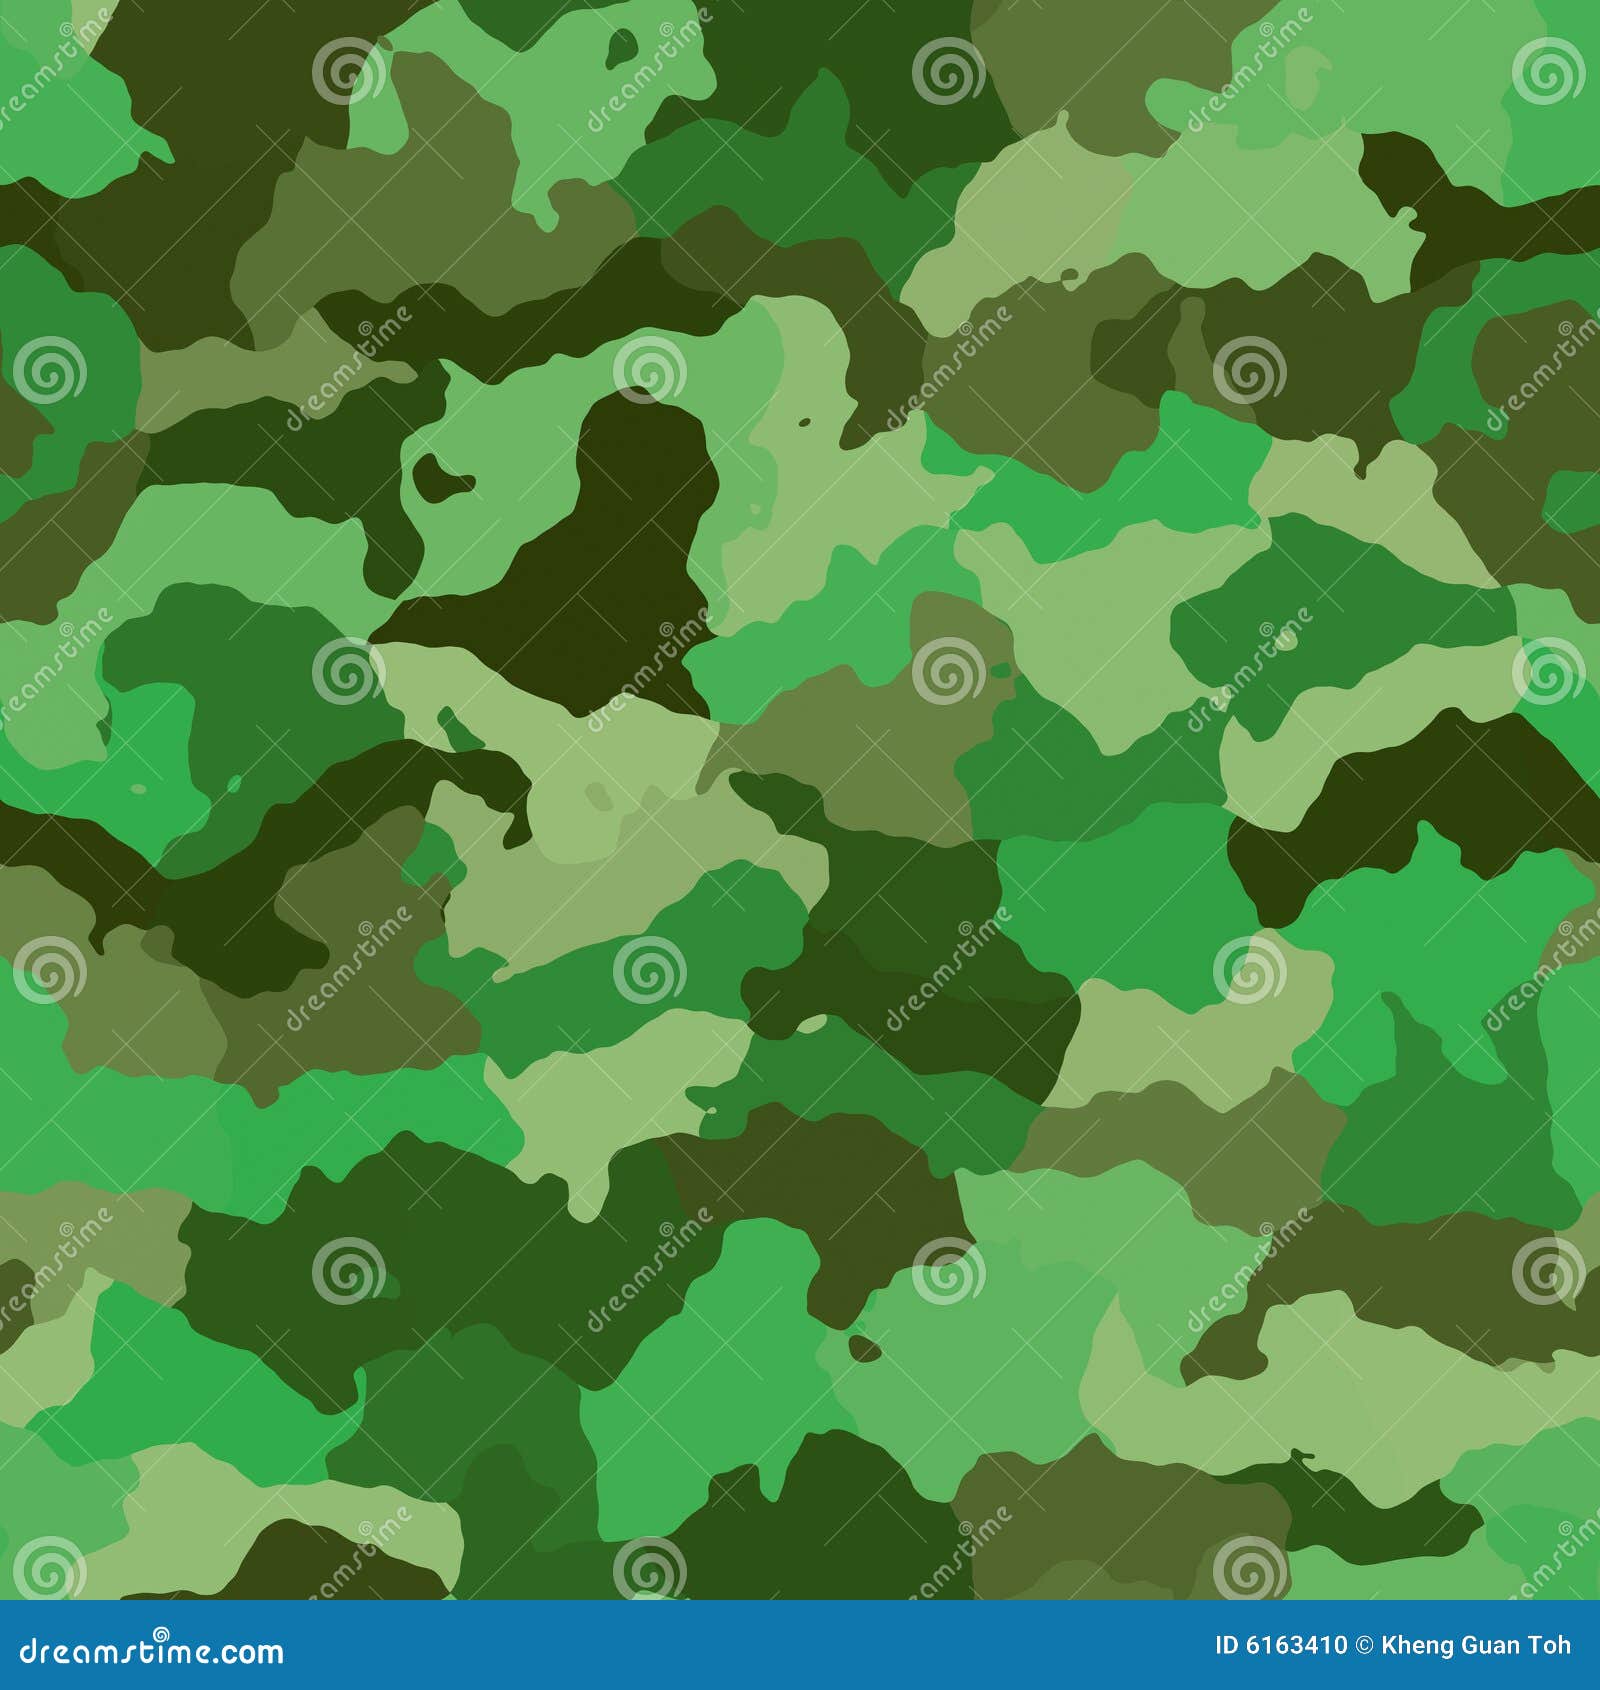 Camouflage pattern texture stock illustration. Illustration of colors ...